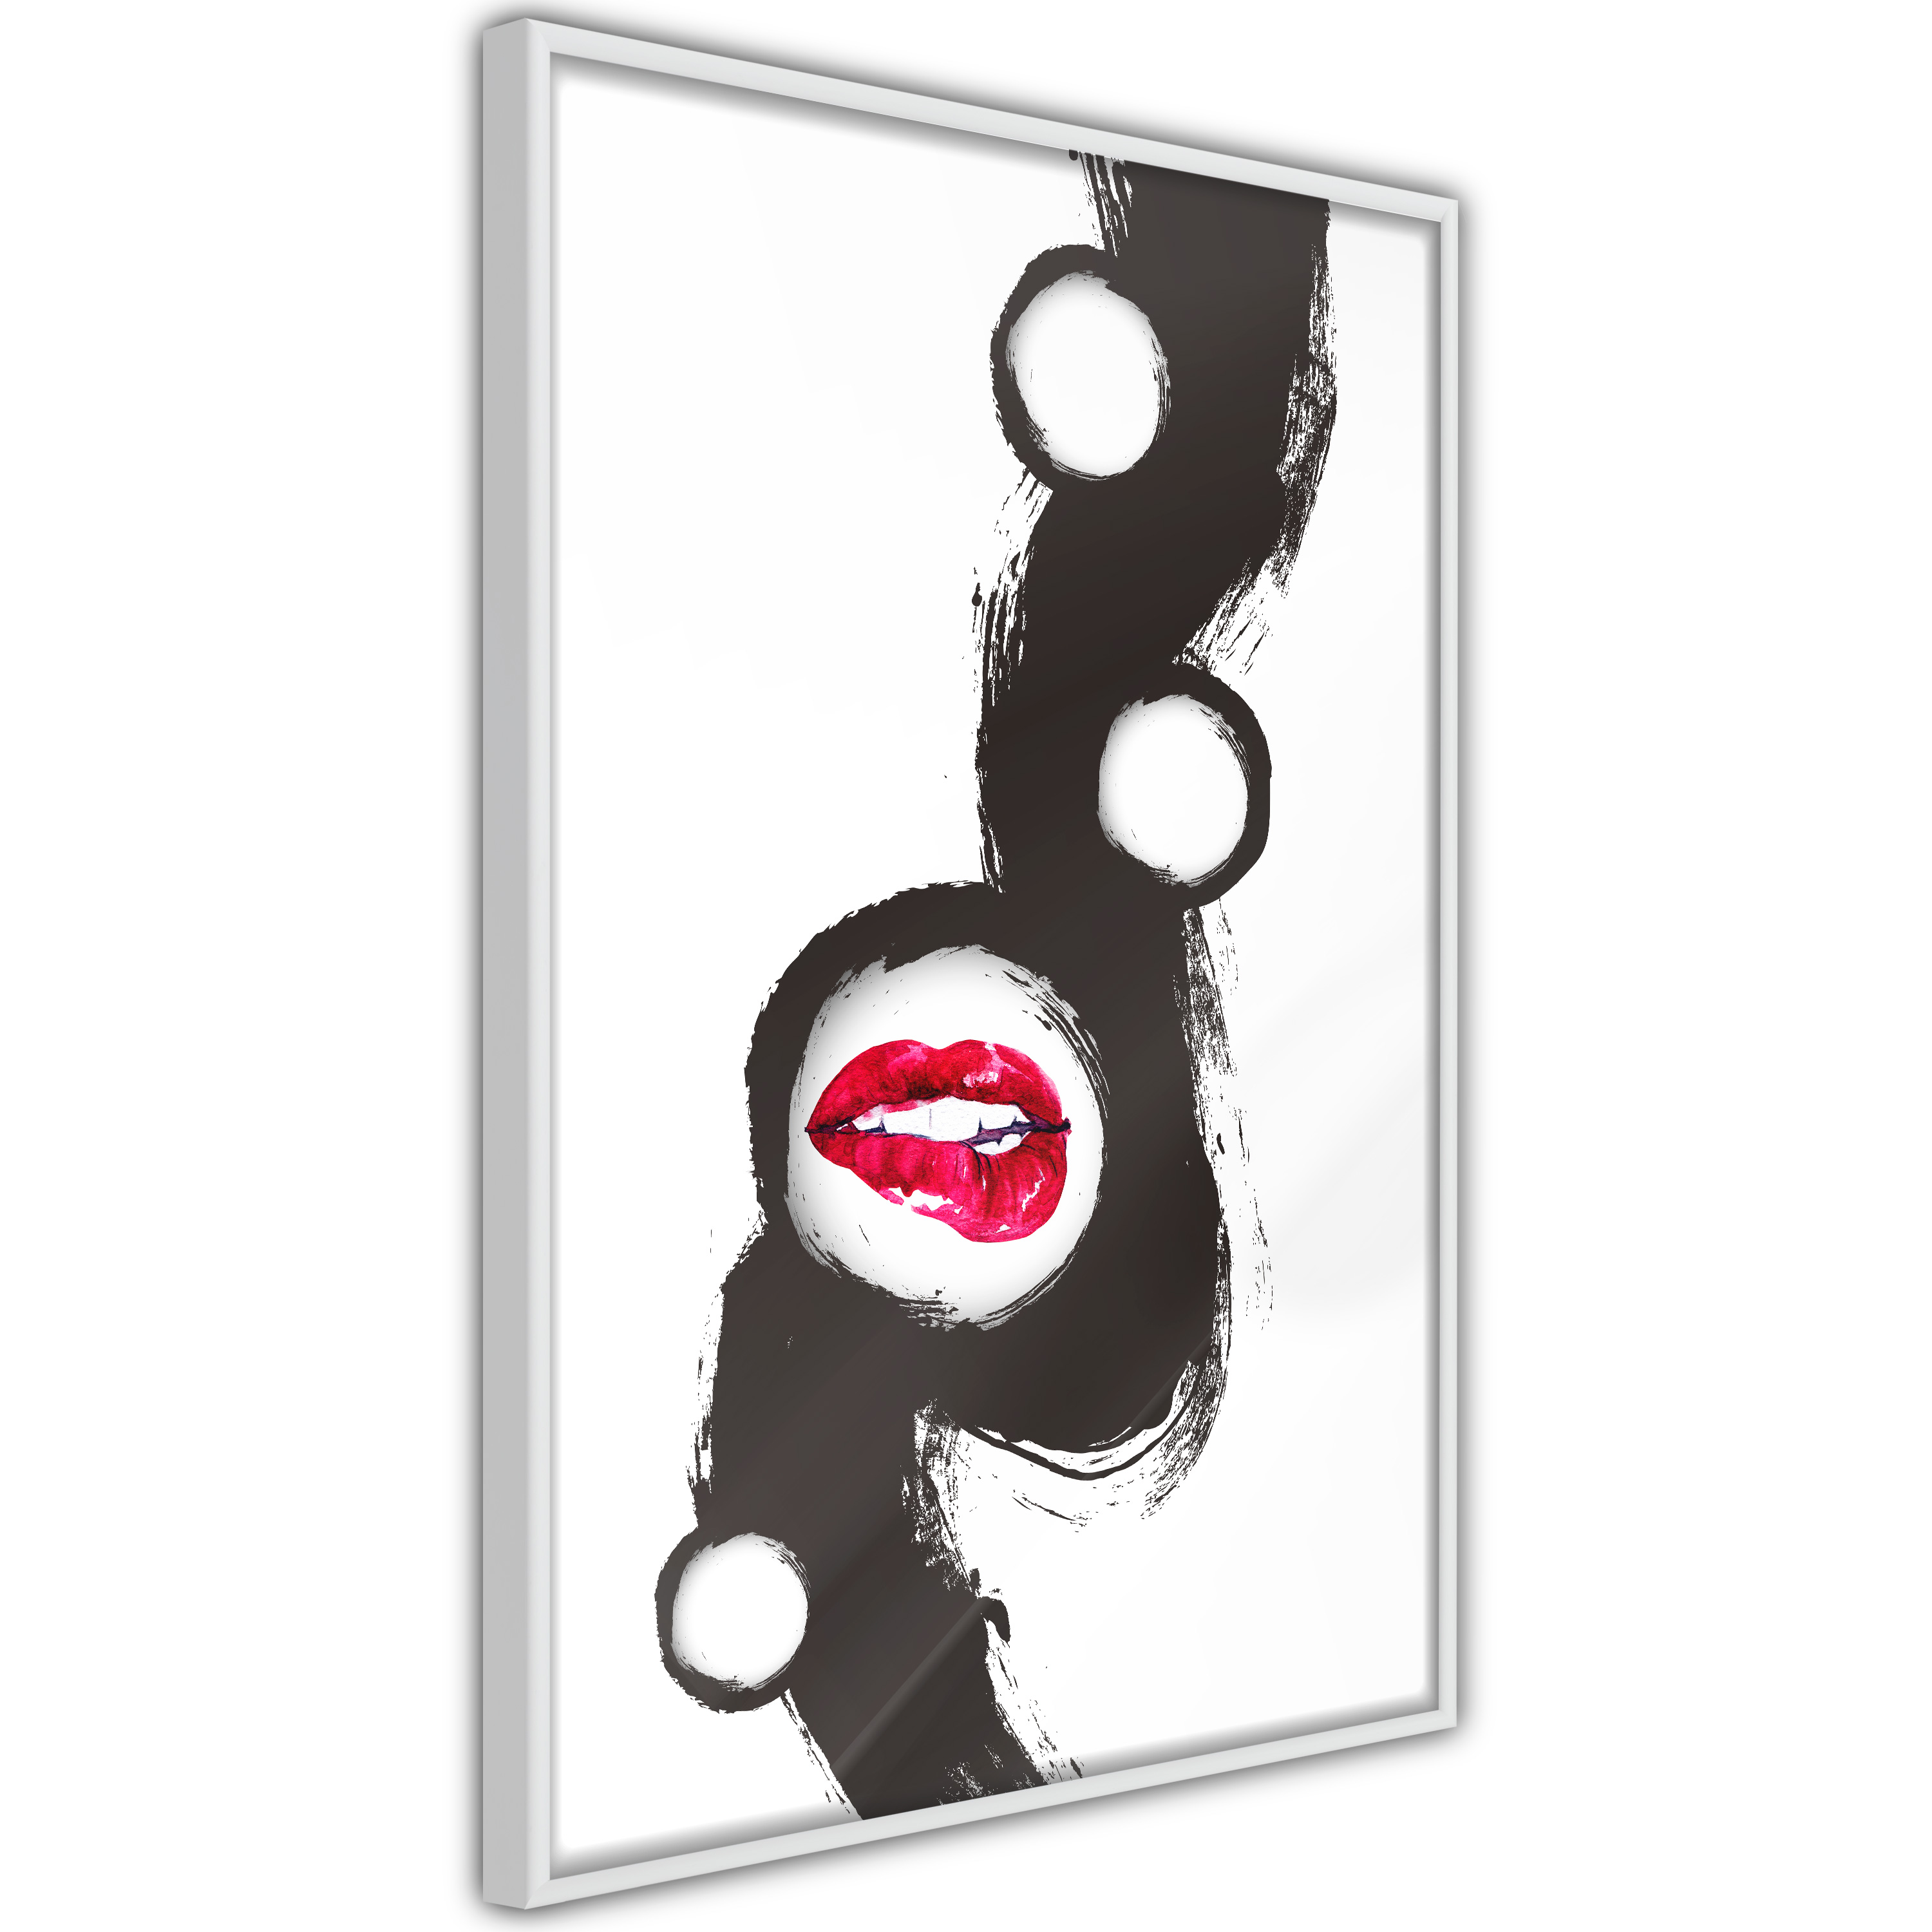 Poster - Passion - 40x60